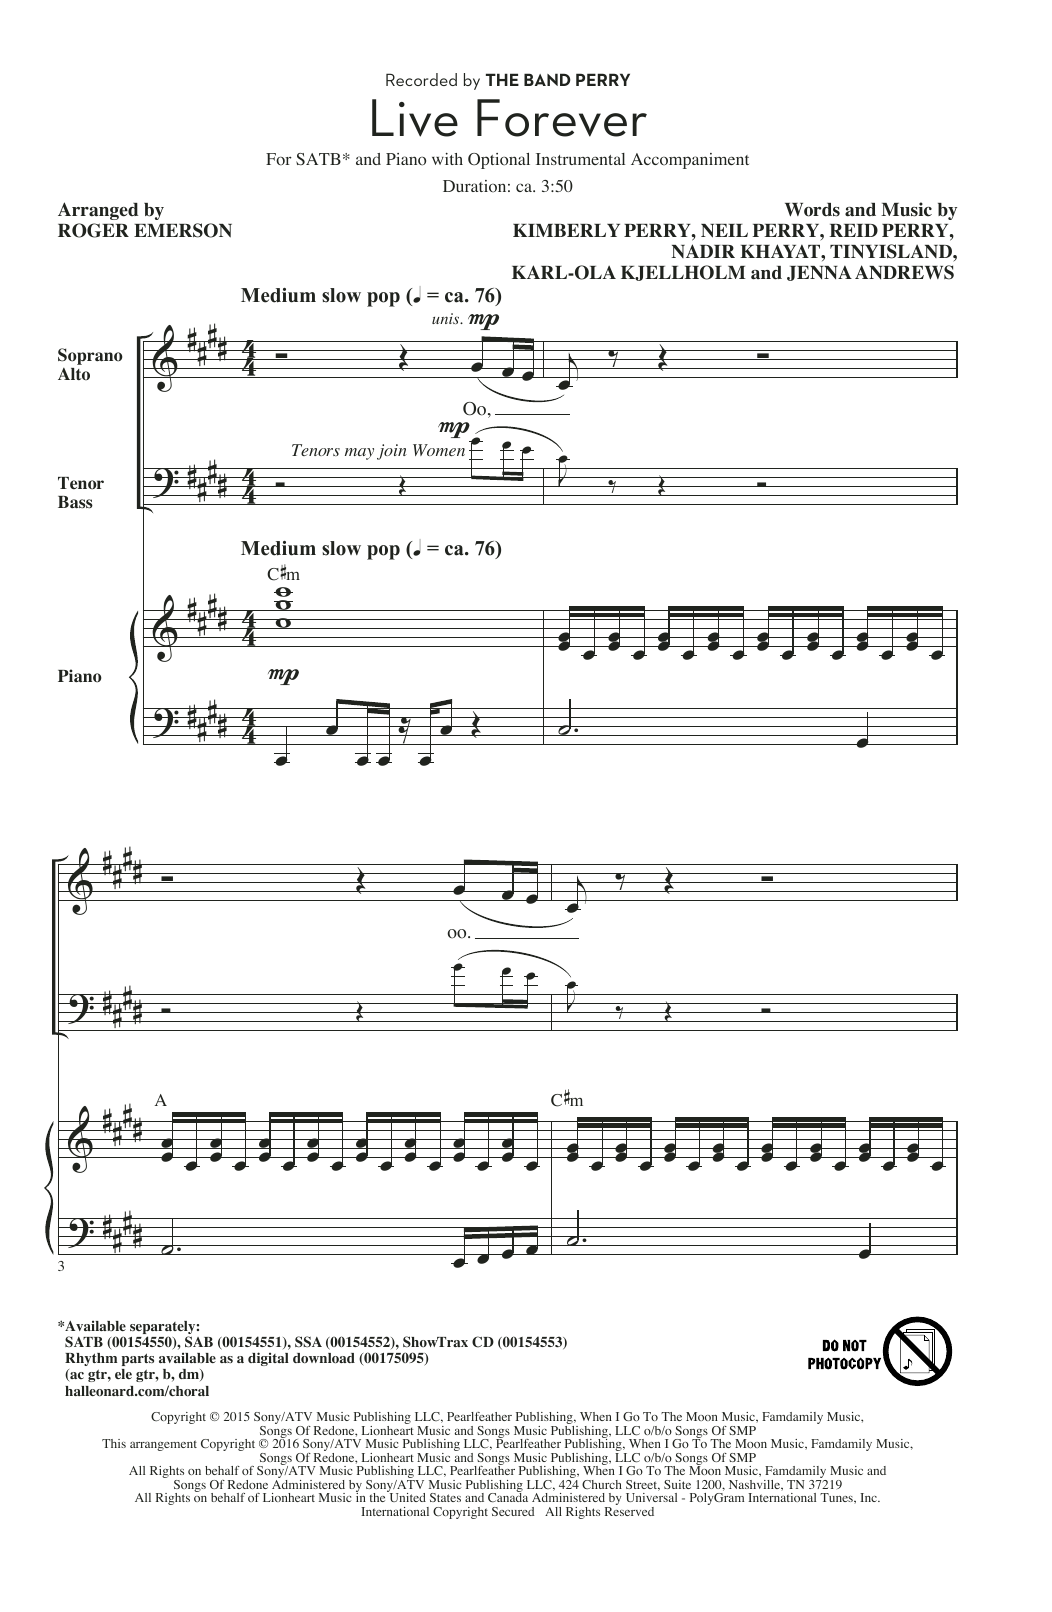 Download The Band Perry Live Forever (arr. Roger Emerson) Sheet Music